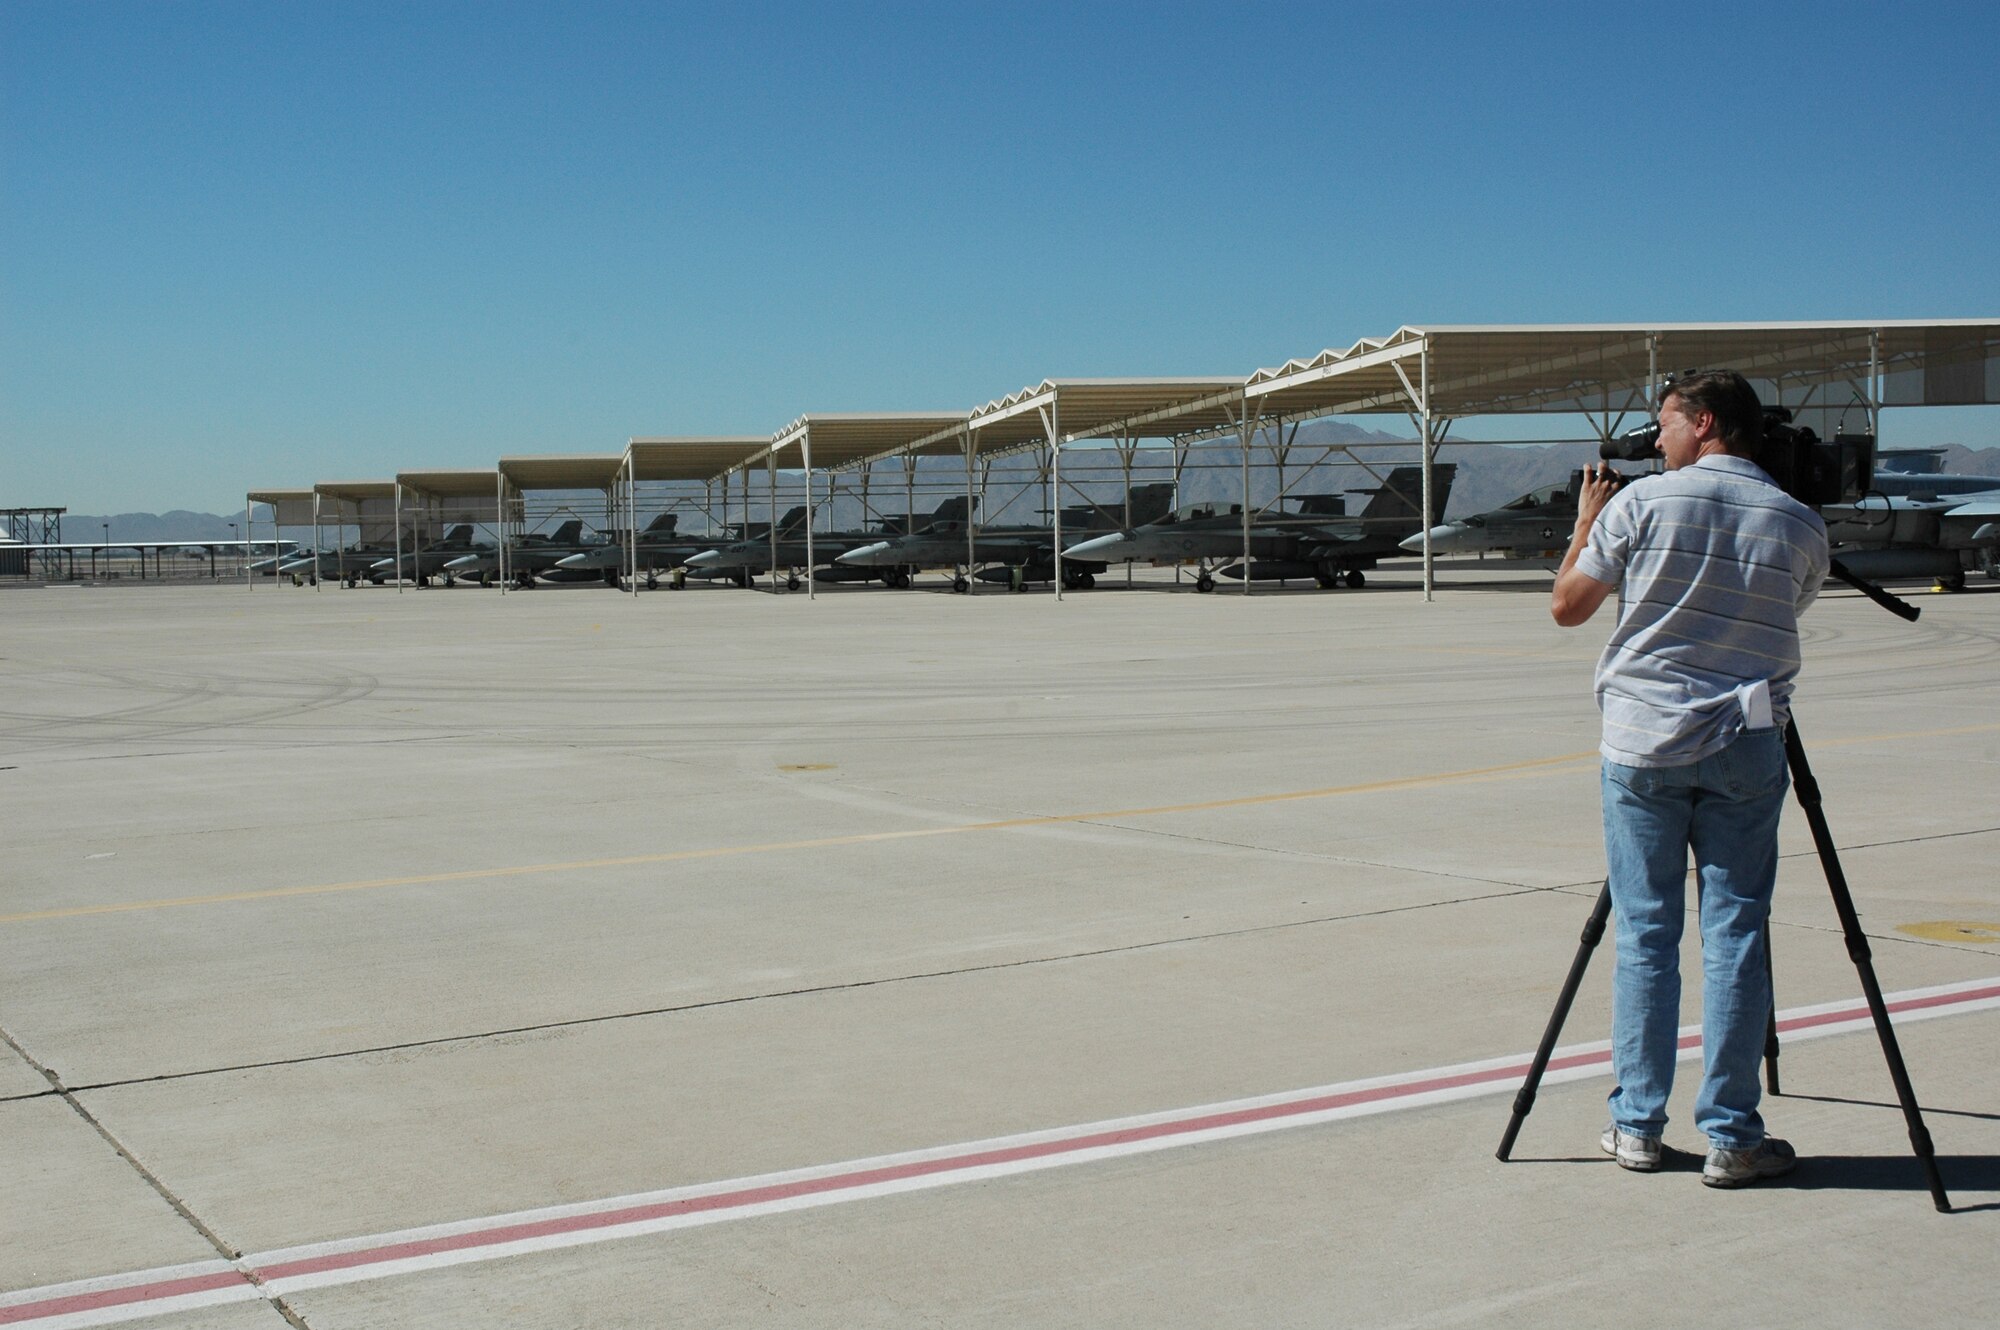 A local news crew gets video footage Oct. 23 of the F/A-18s from Marine Corps Air Station Miramar, Calif., parked on the flightline outside the 944th Fighter Wing. MCAS Miramar and the 3rd Marine Aircraft Wing evacuated 30 aircraft to Luke Air Force Base, Ariz., Oct. 22, due to the close proximity of wildfires raging in California. The squadron of F/A-18s is just one of six from Miramar evacuated to bases in Arizona and California. The aircraft will remain at these locations until the U.S. Marine Corps determines it is safe to return to their home station. While some aircraft are being evacuated, there are numerous heavy and medium lift helicopters remaining at Miramar to support the fire fighting operations. (U.S. Air Force photo/Tech. Sgt. Susan Stout)